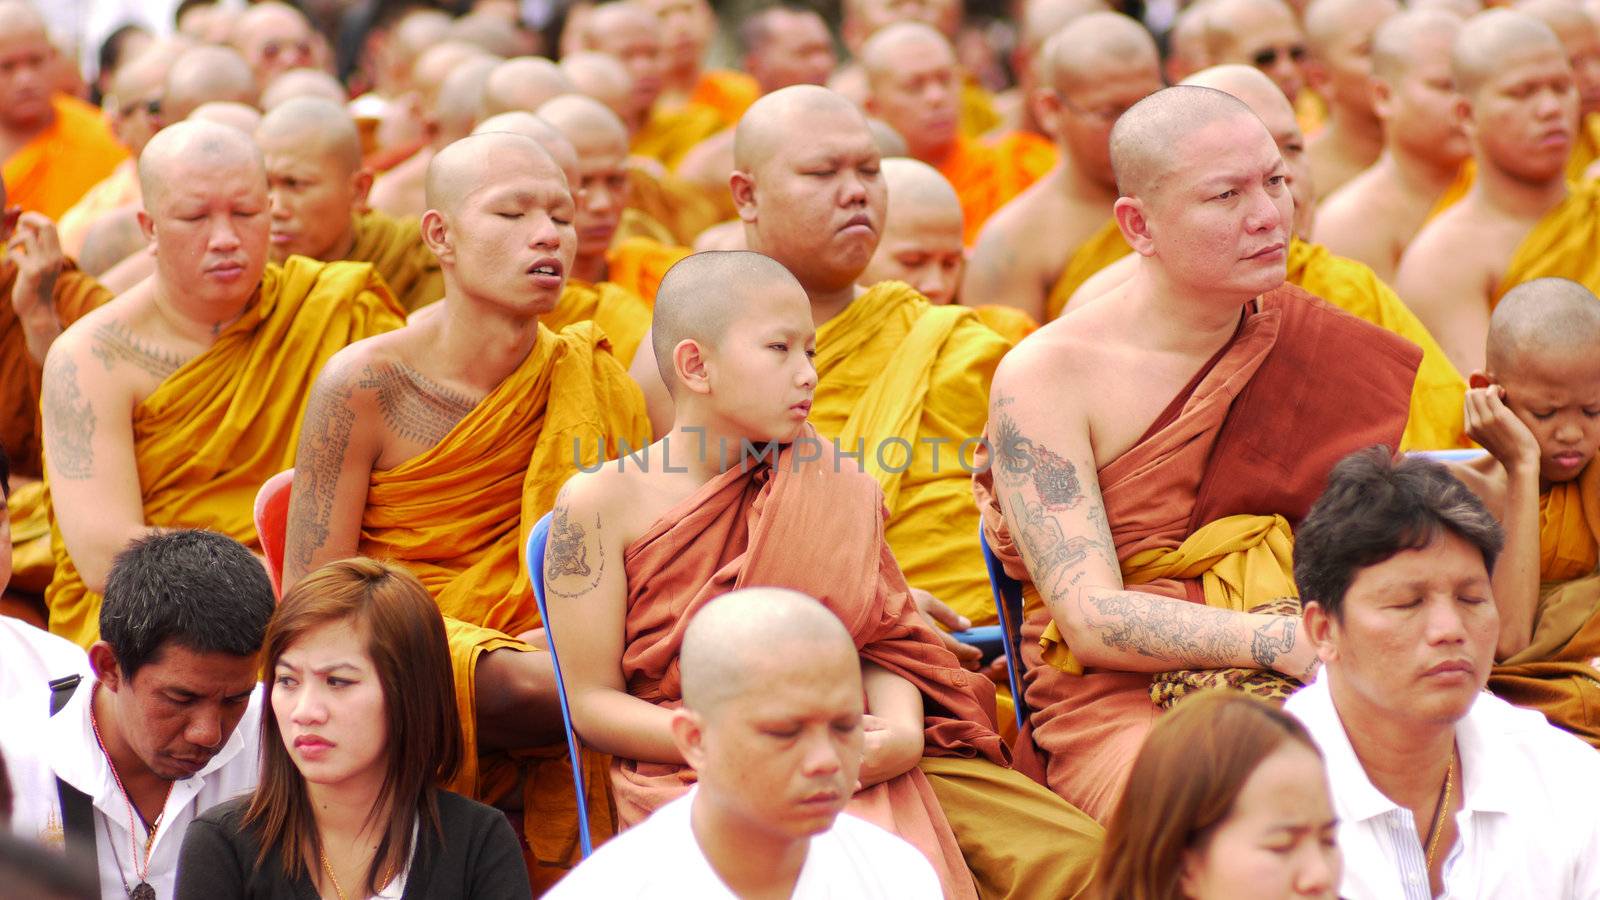 NAKHON CHAISI - MARCH 19: Monks with tattoos at the Tattoo Festival at Wat Bang Phra on March 19, 2011 in Nakhon Chaisi, Thailand.